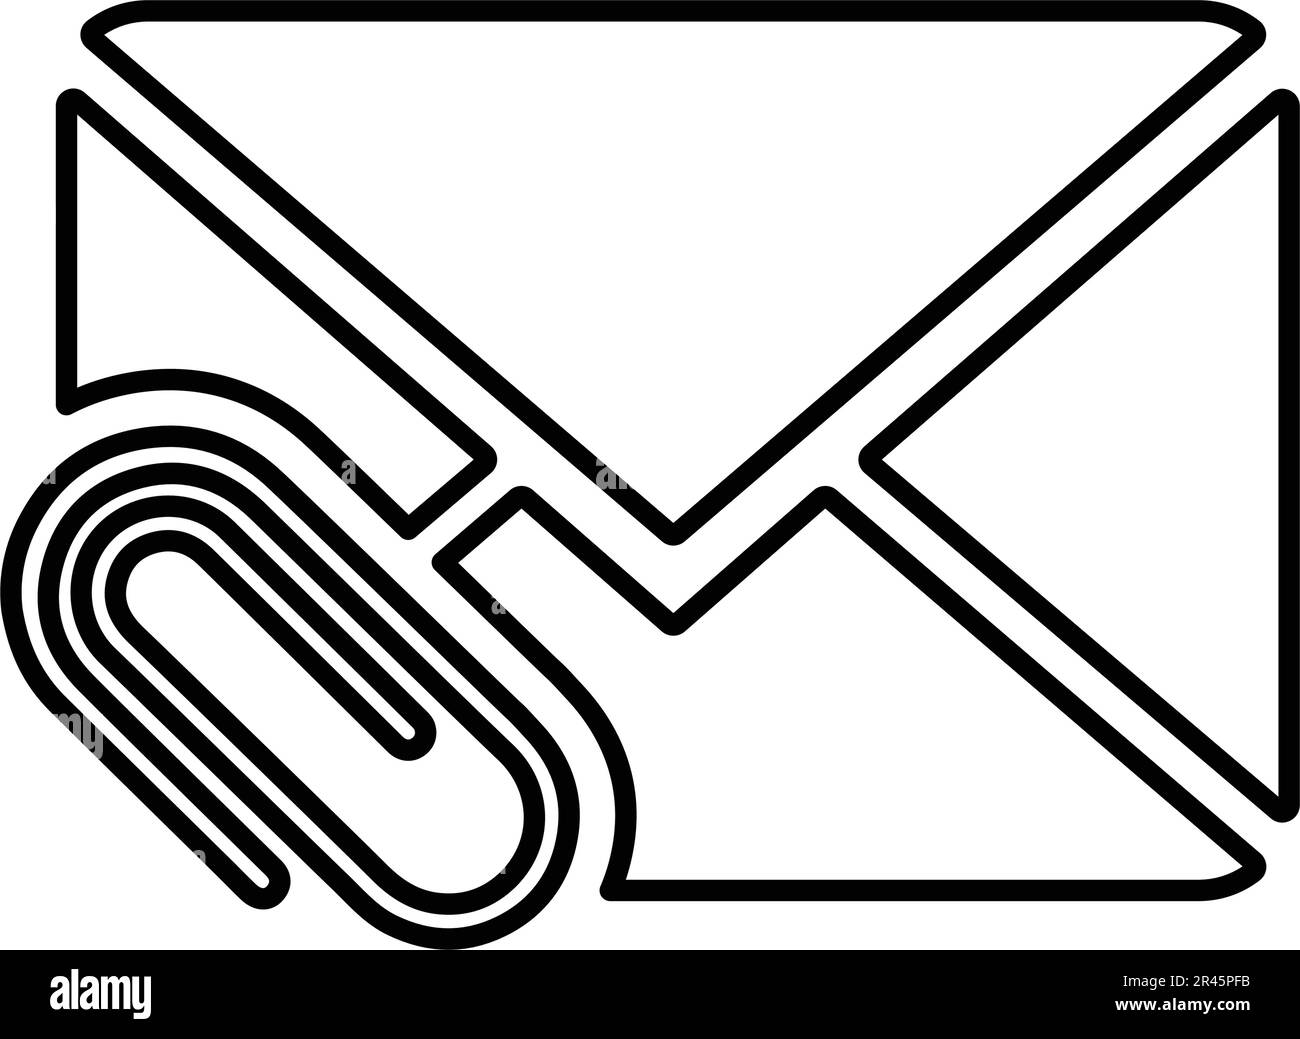 Attached, email, envelope, pinned icon. Commercial use, printed files and presentations, Promotional Materials, web or any type of design project. Stock Vector